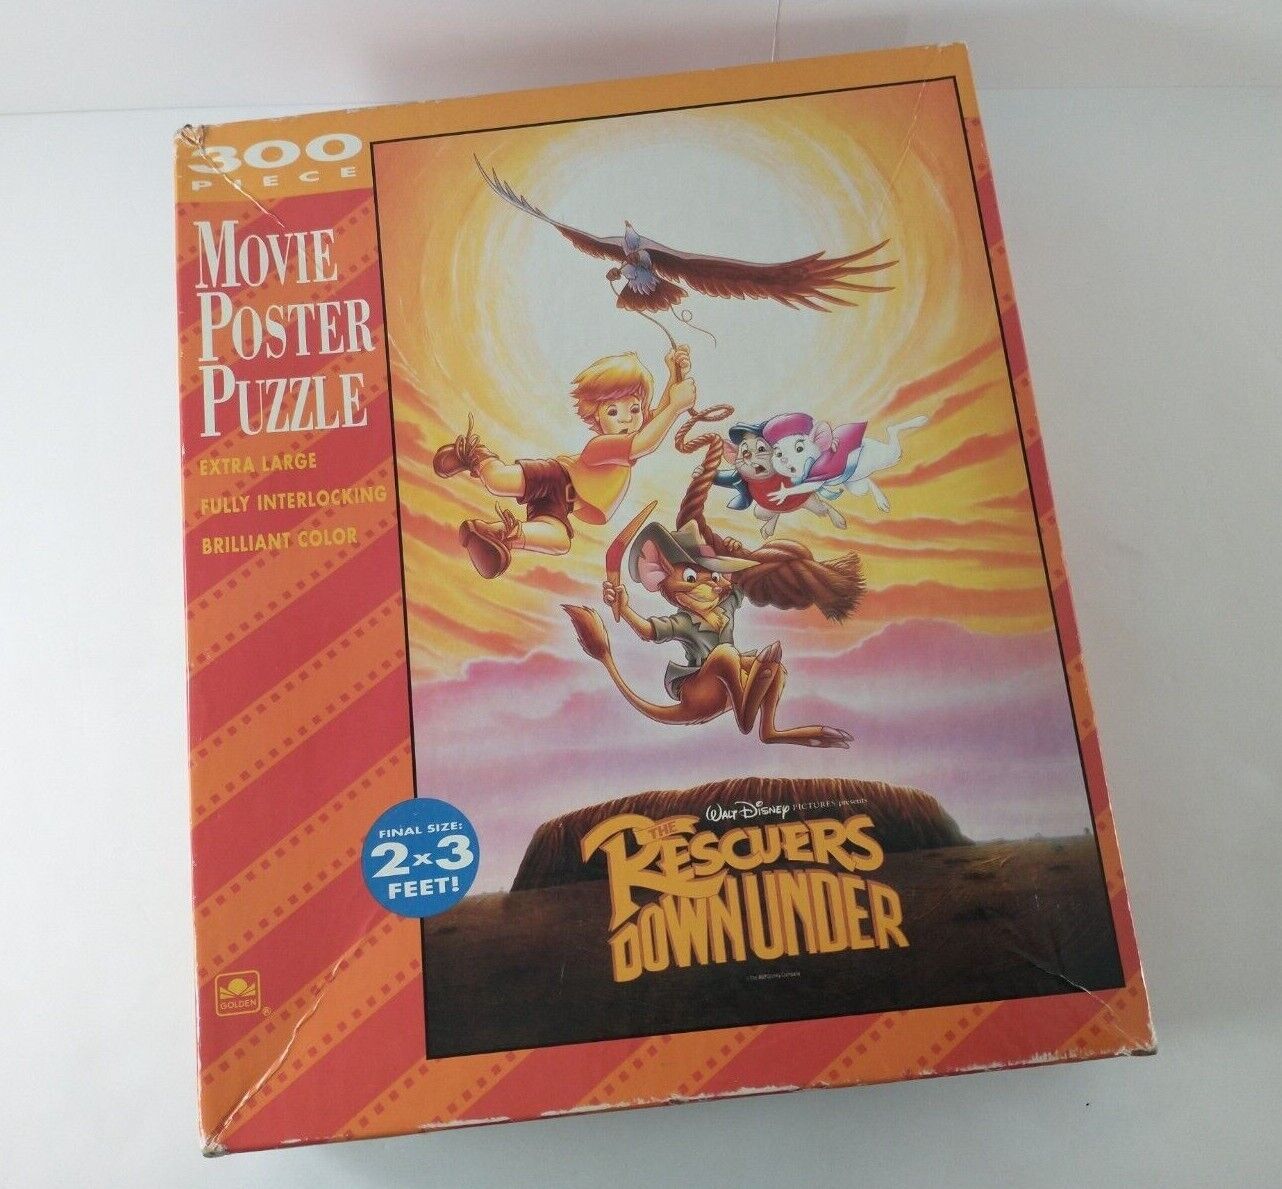 Vintage Disney THE RESCUERS DOWN UNDER Extra Large 300-Piece Movie Poster Puzzle